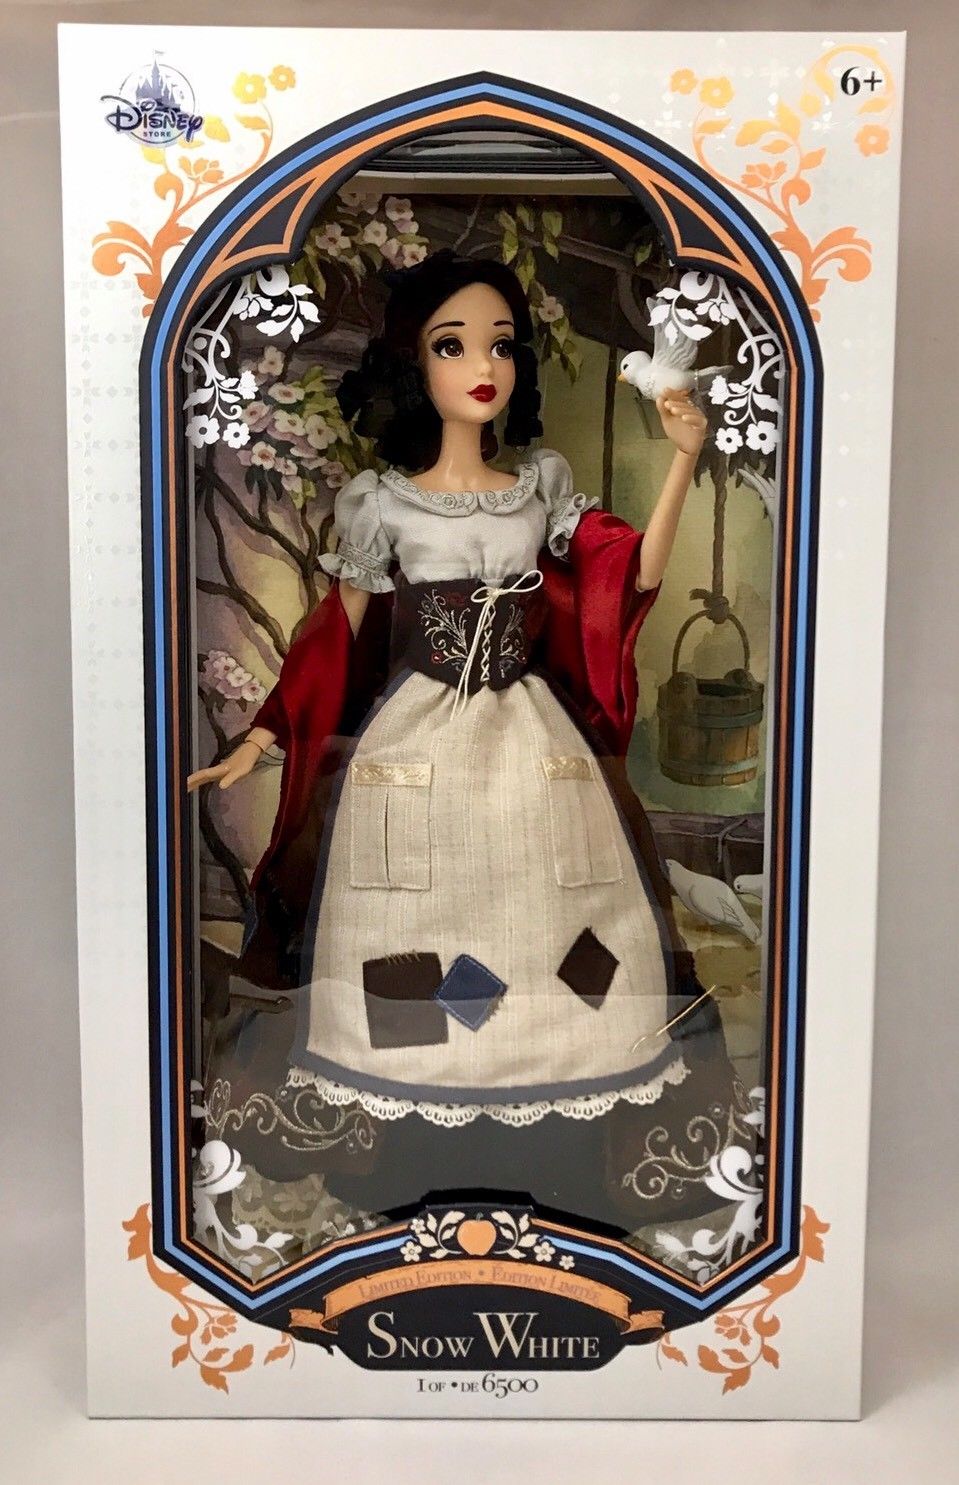 Disney Store 2017 SNOW WHITE 17" Limited Edition Doll 6500 - NEW